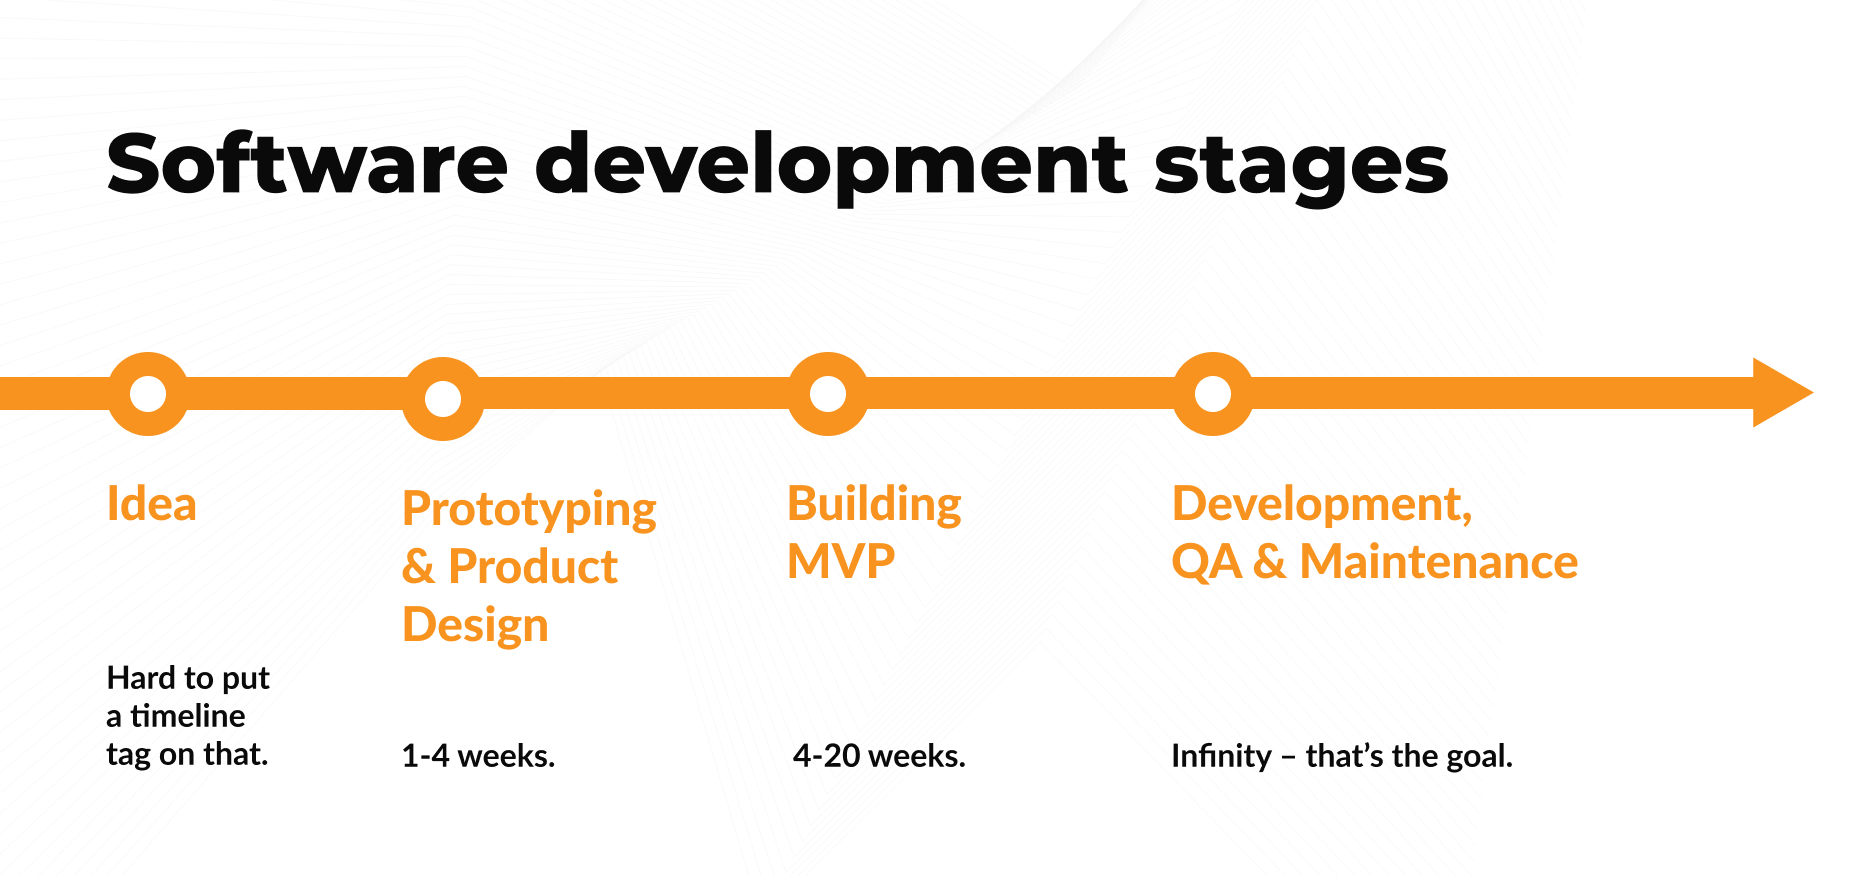 Software development stages